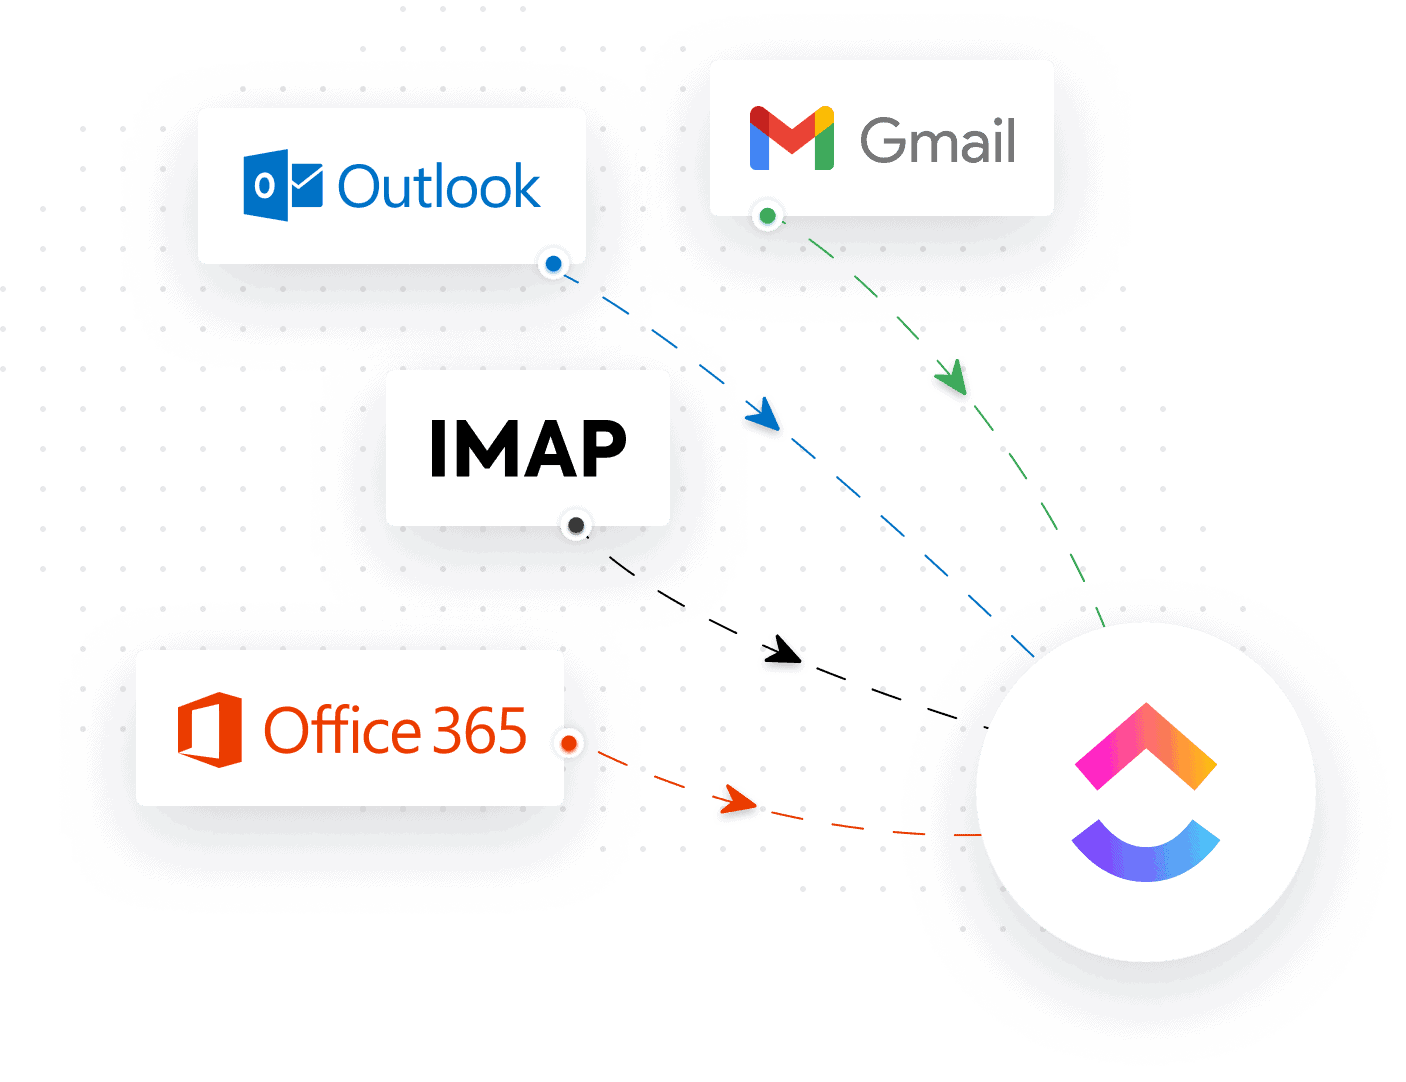 Manage your emails and make them more accessible by bringing them together in one place. Integrate any email account from Gmail, Outlook, Office 365, or IMAP.